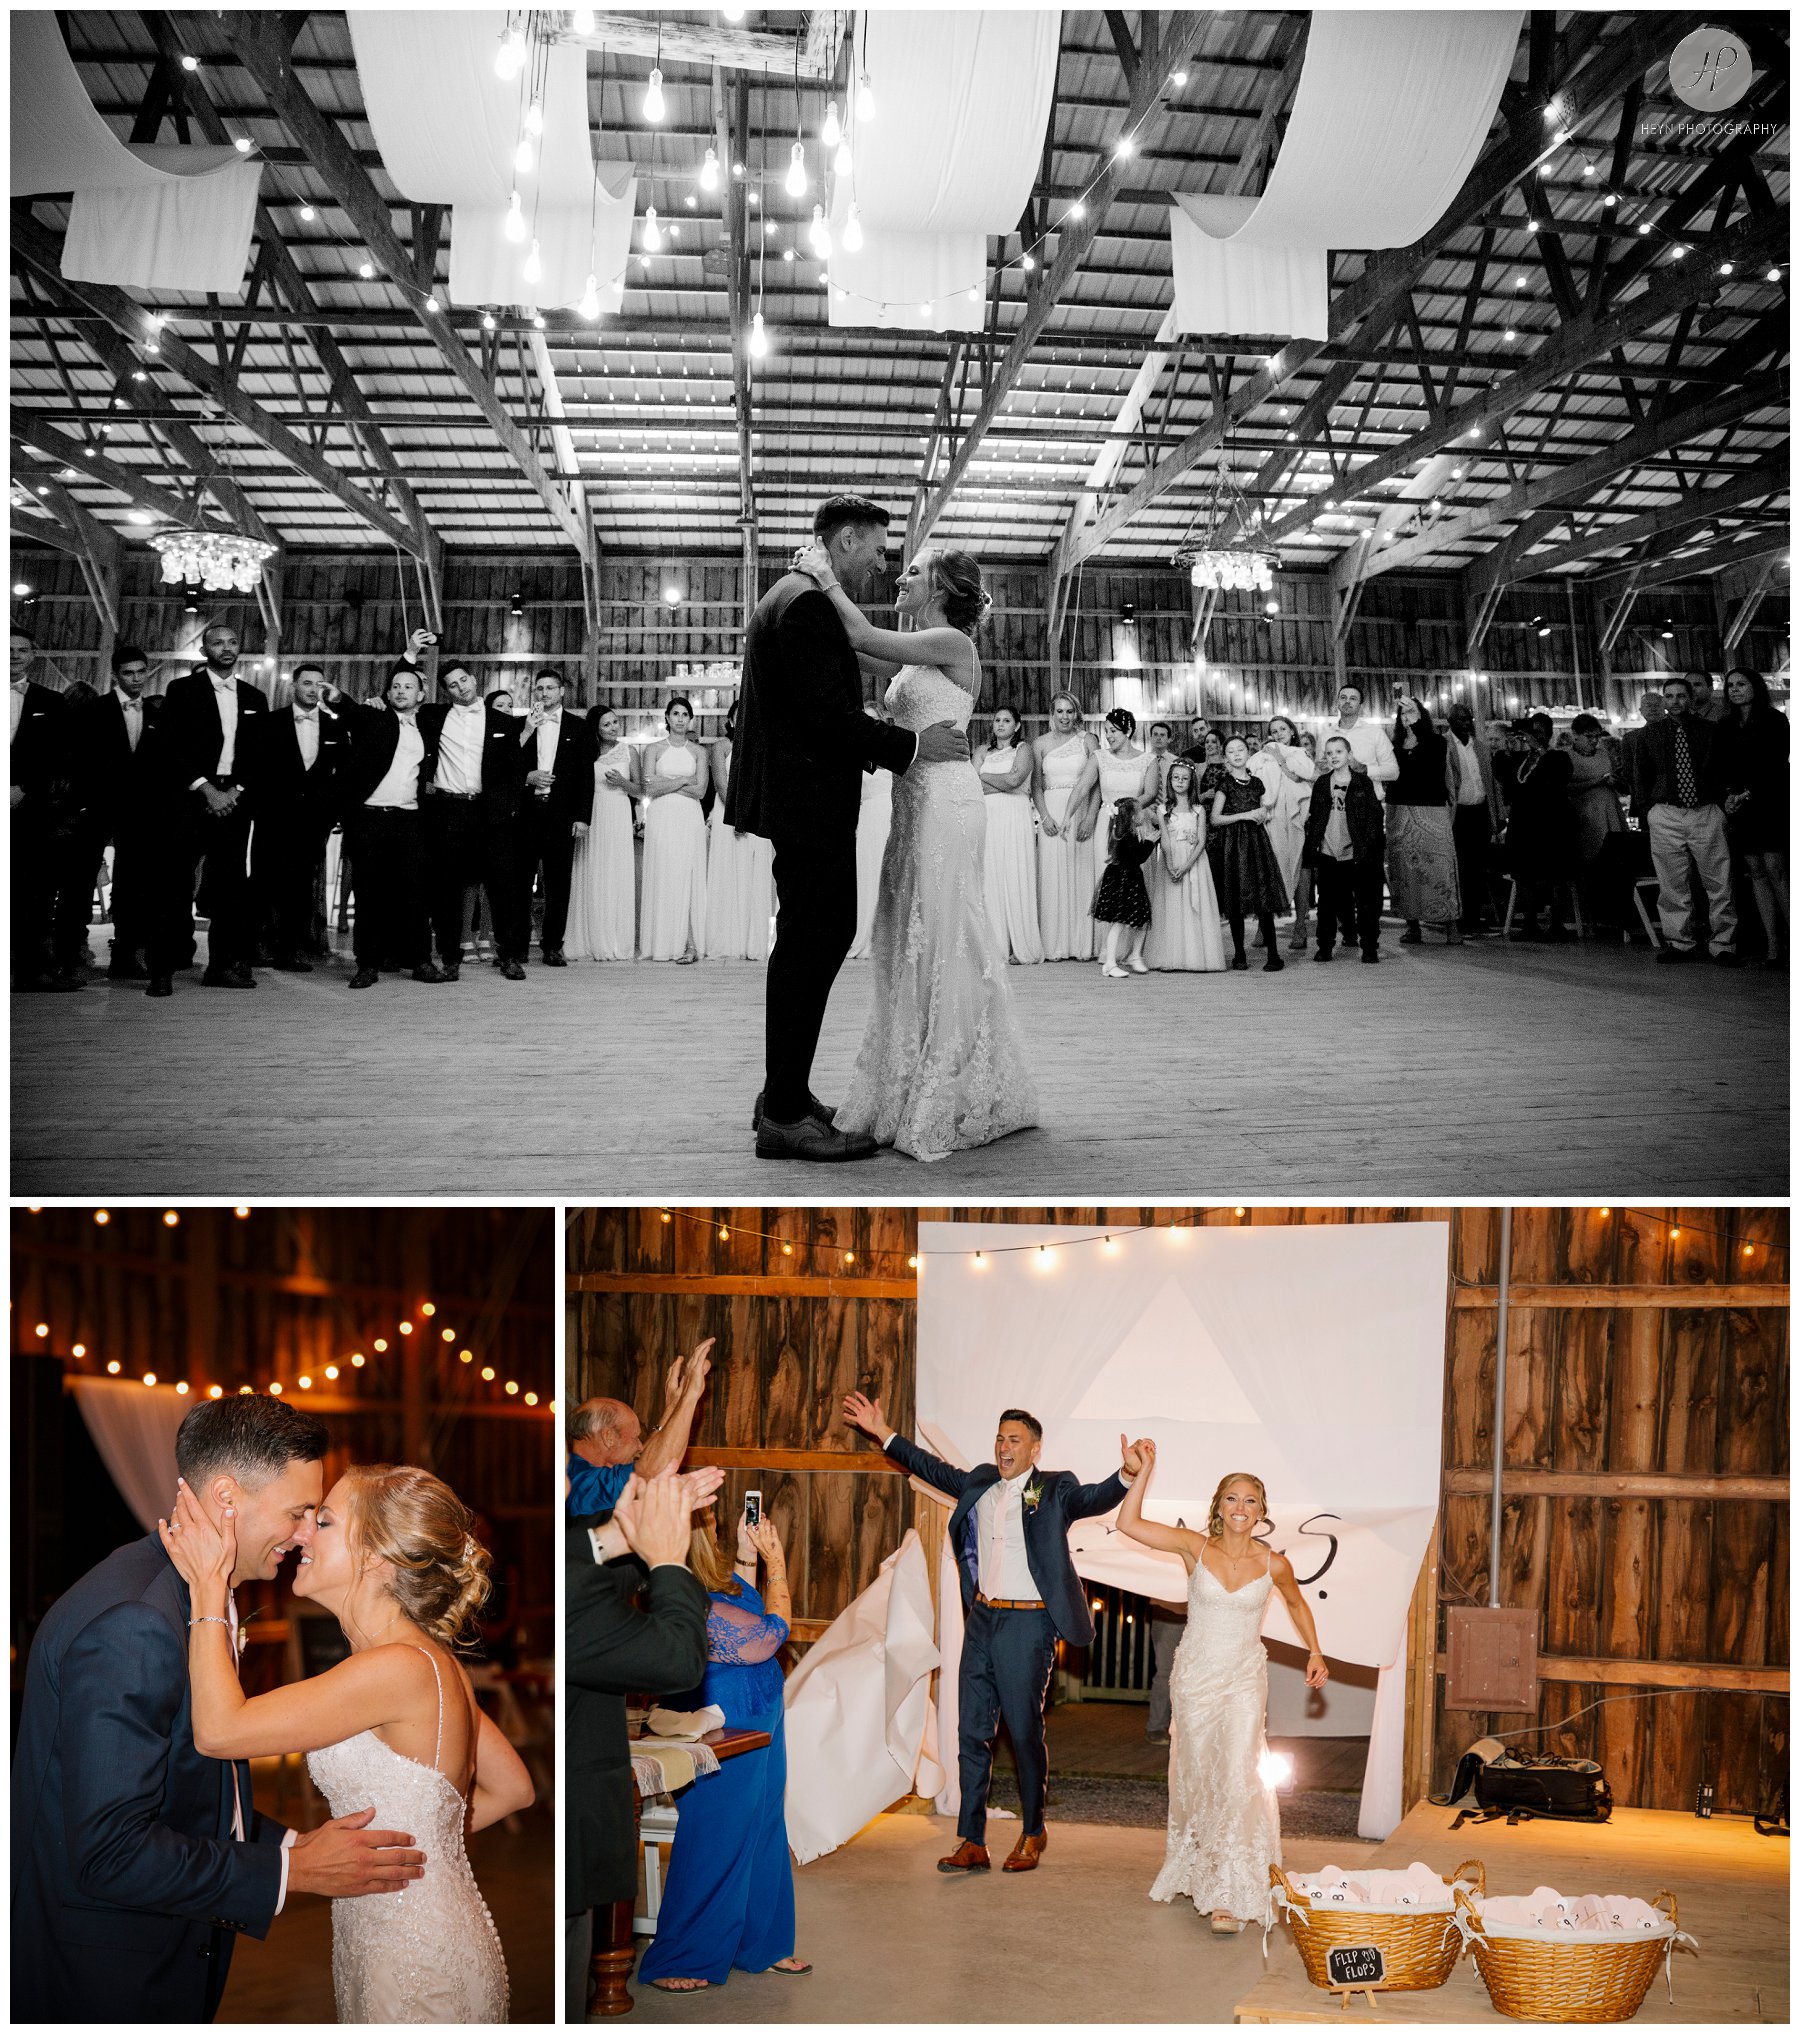 bride and groom first dance at barn reception at stone tavern farm wedding in the catskills new york